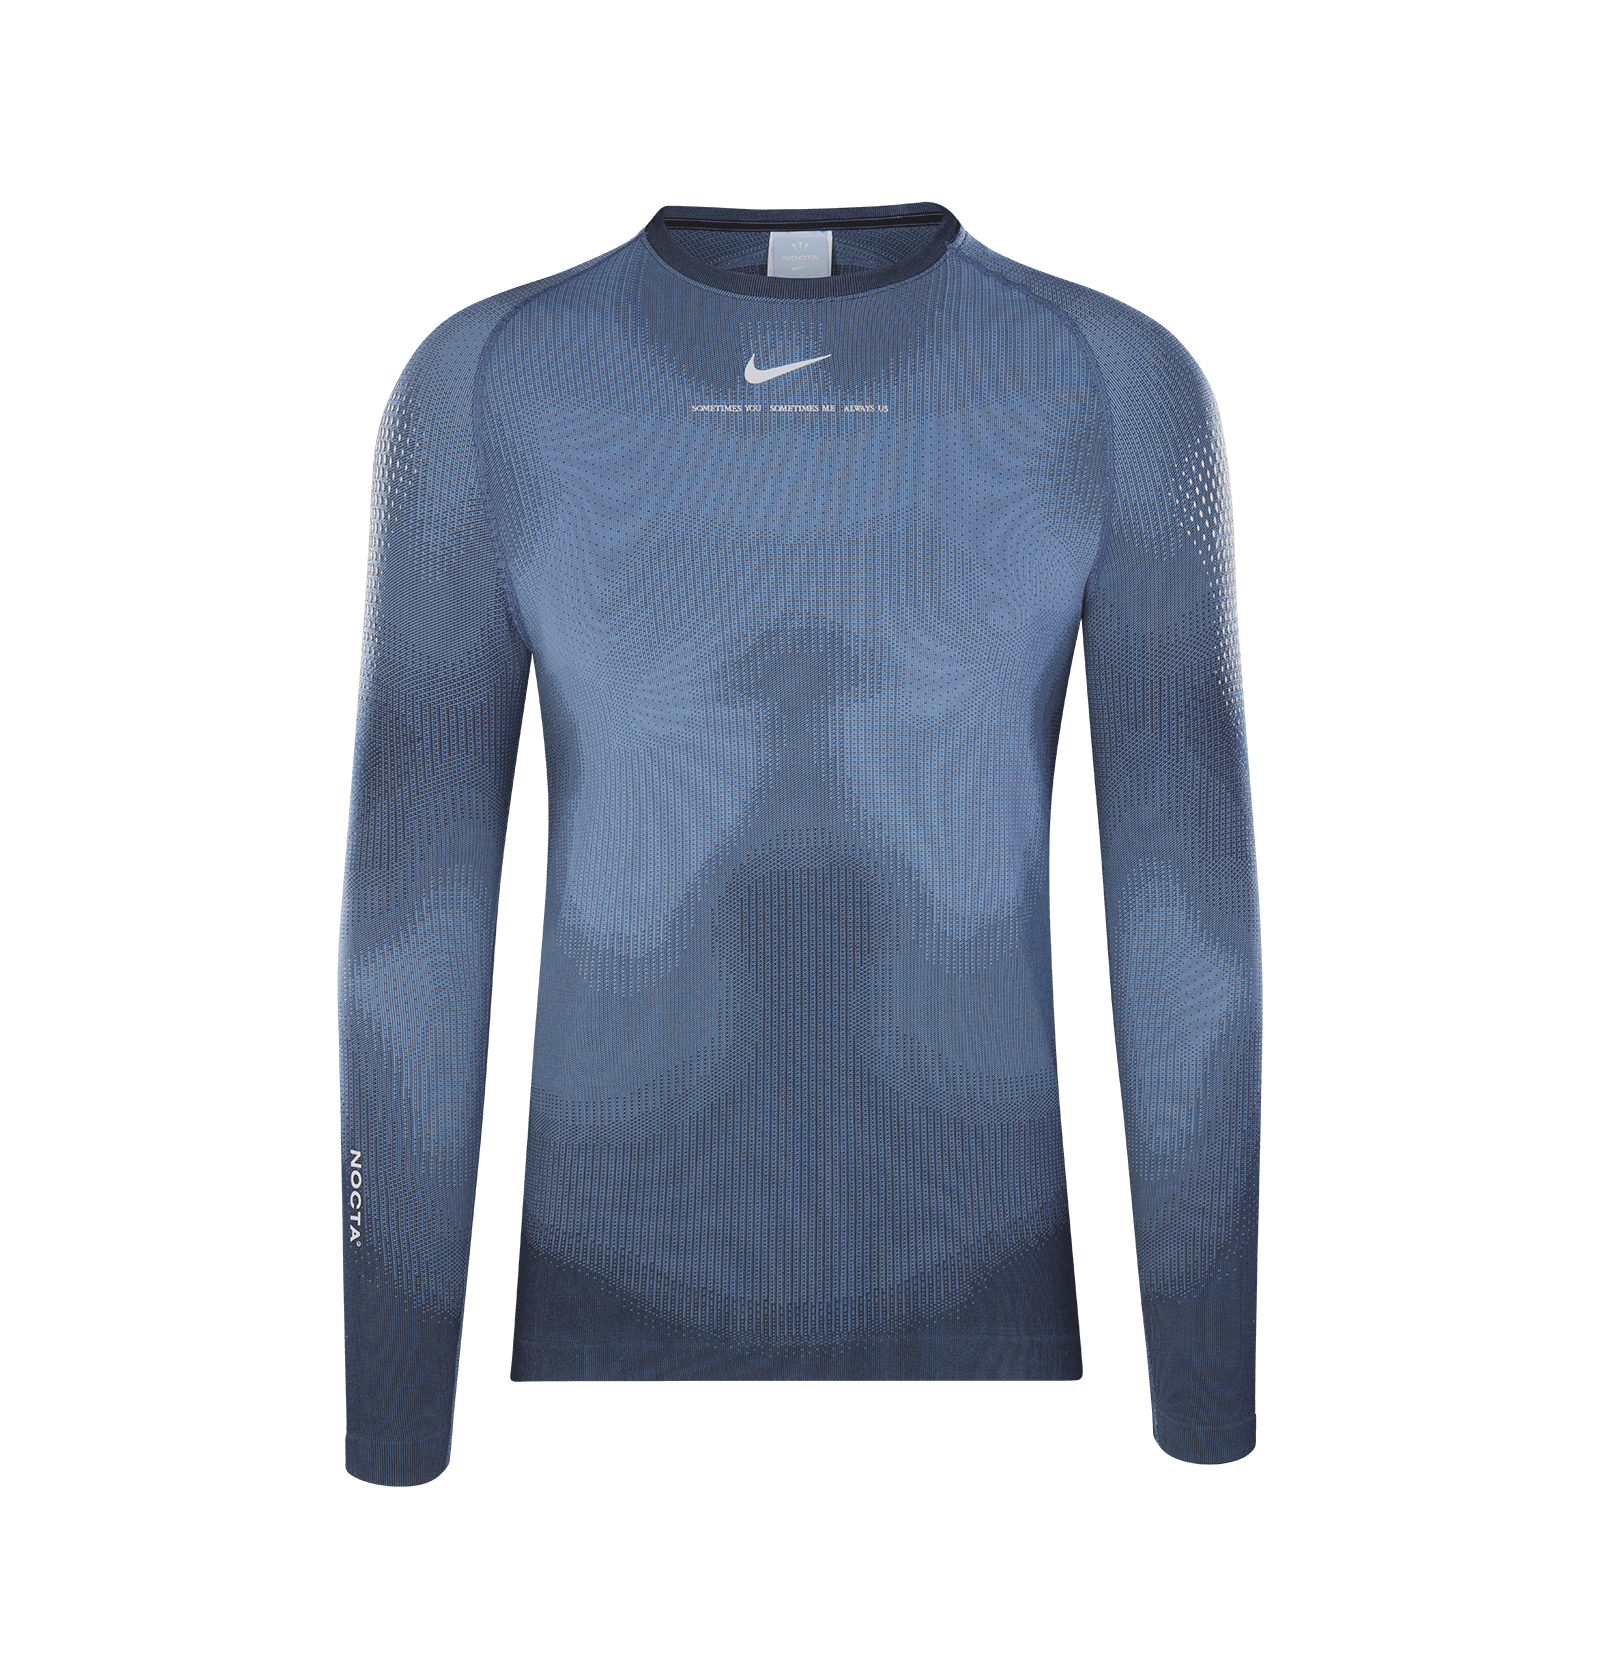 LS Engineered Base Layer Top - IMAGE 1